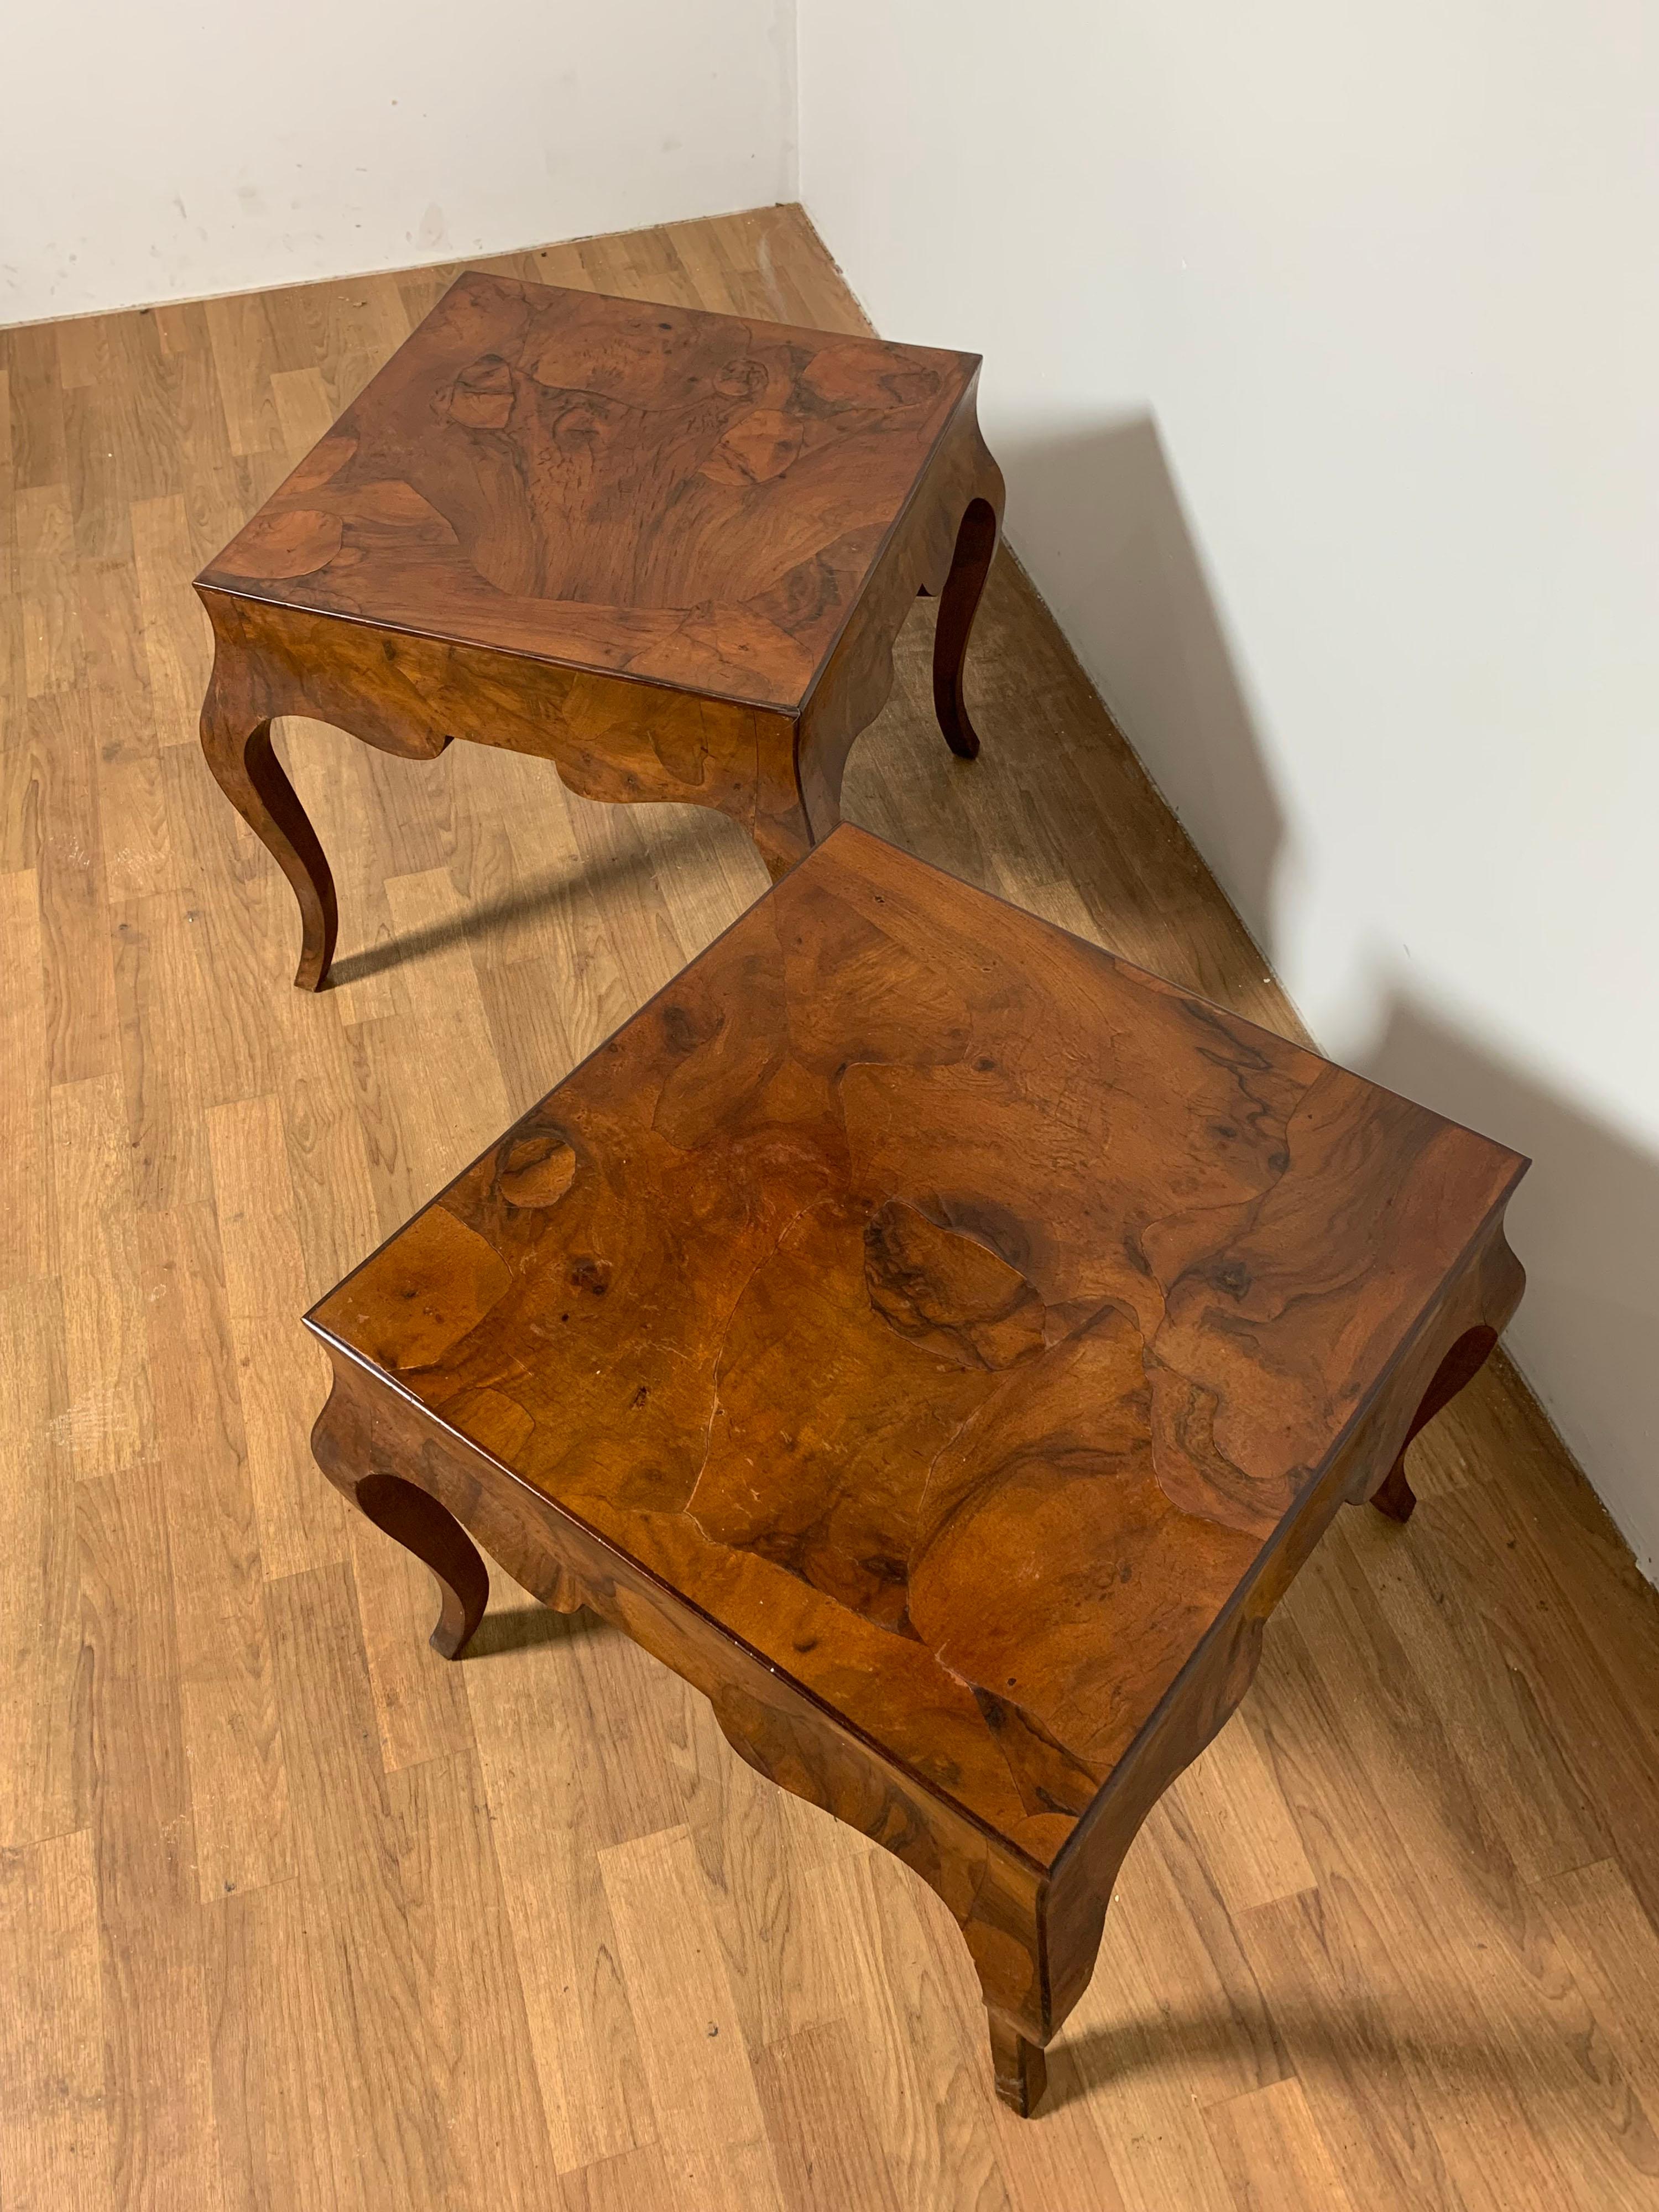 Pair of Italian oyster burl side tables with cabriole legs and shaped skirt, circa 1950s.